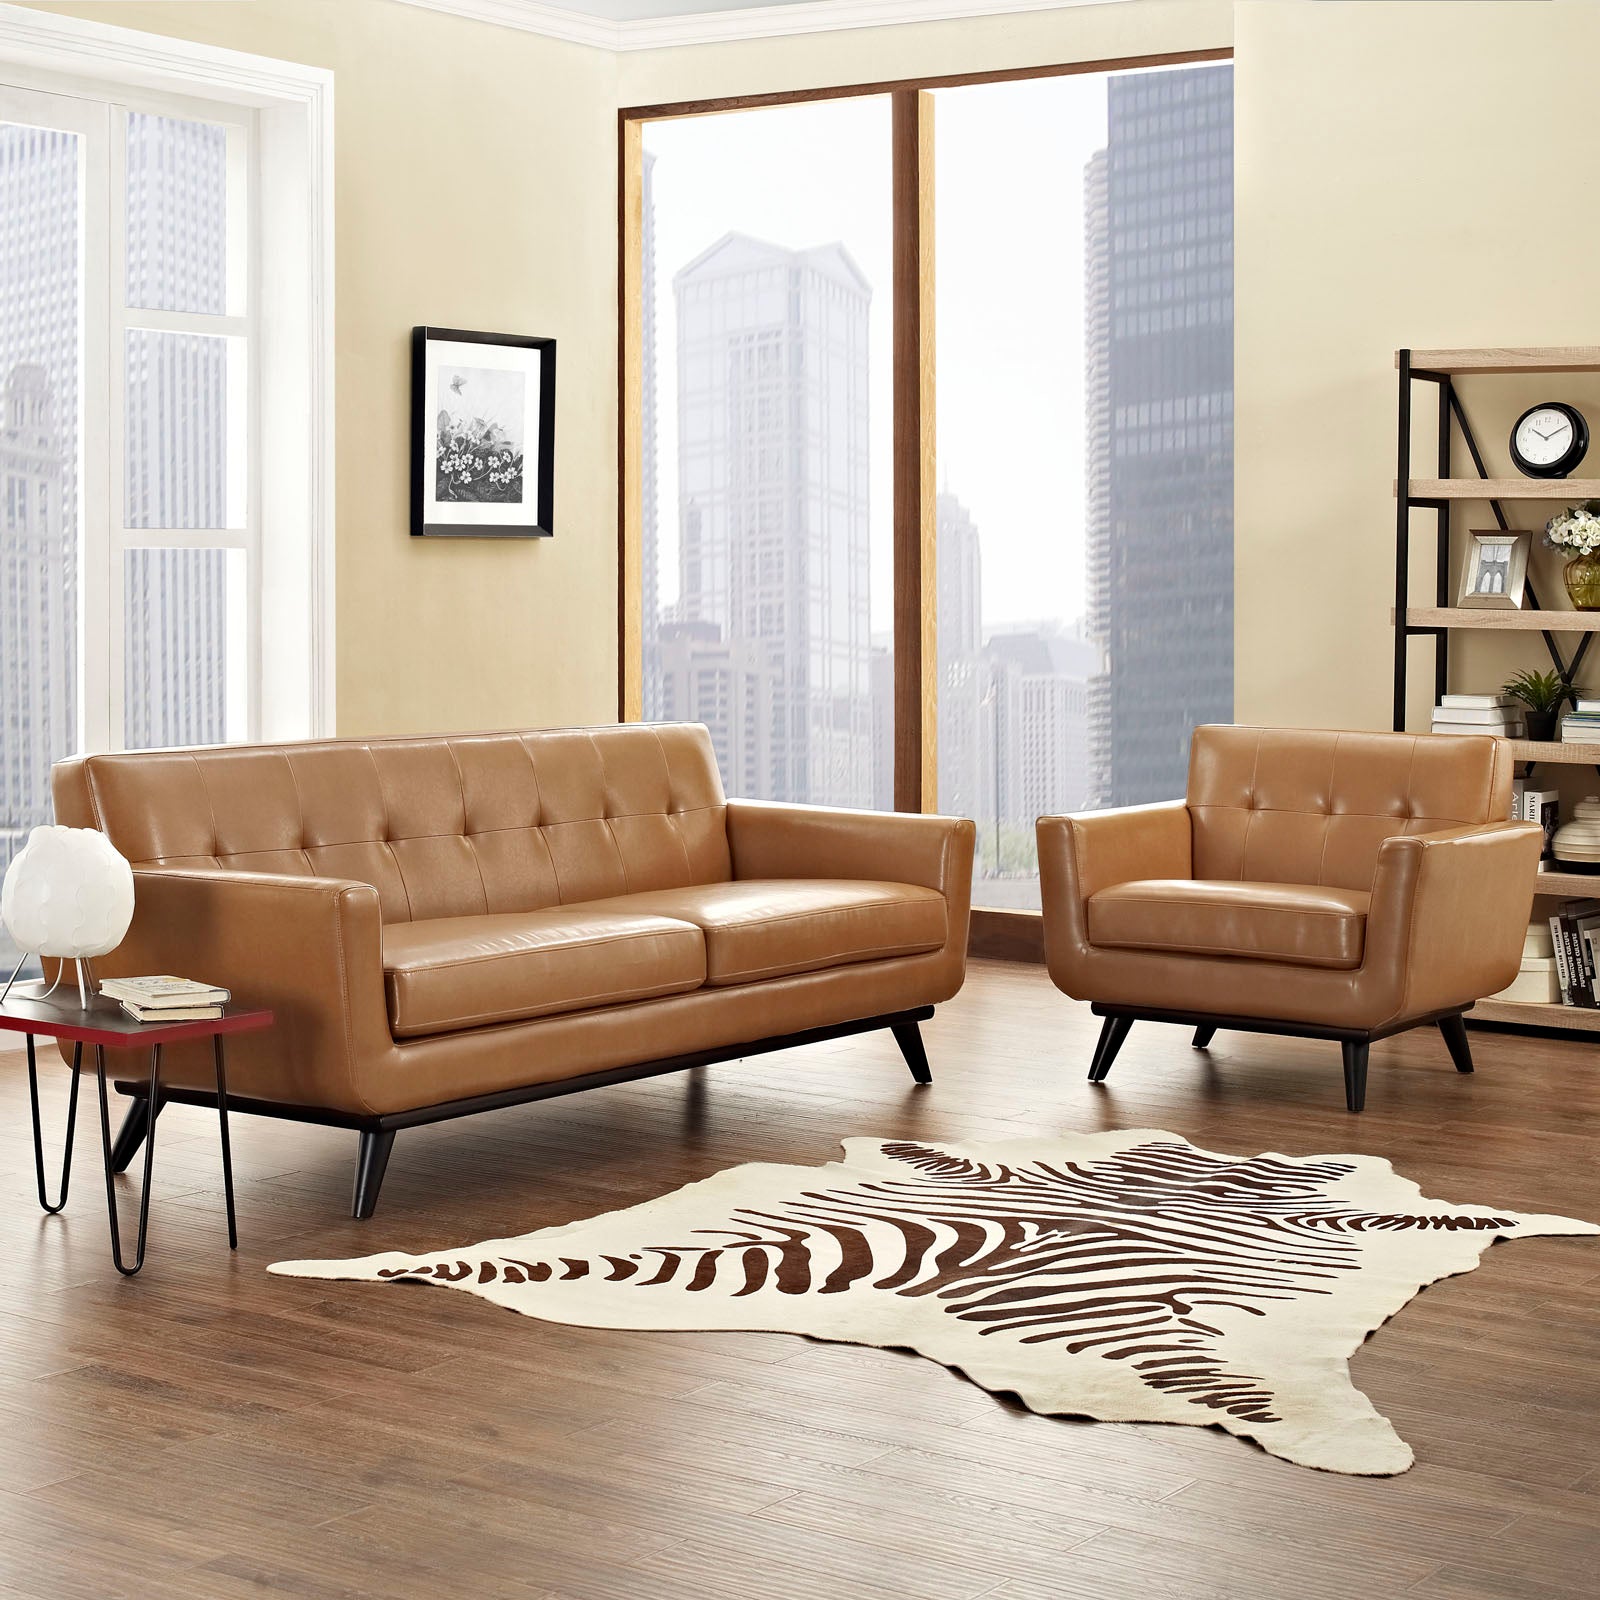 Modway Living Room Sets - Engage 2 Piece Leather Living Room Set Tan